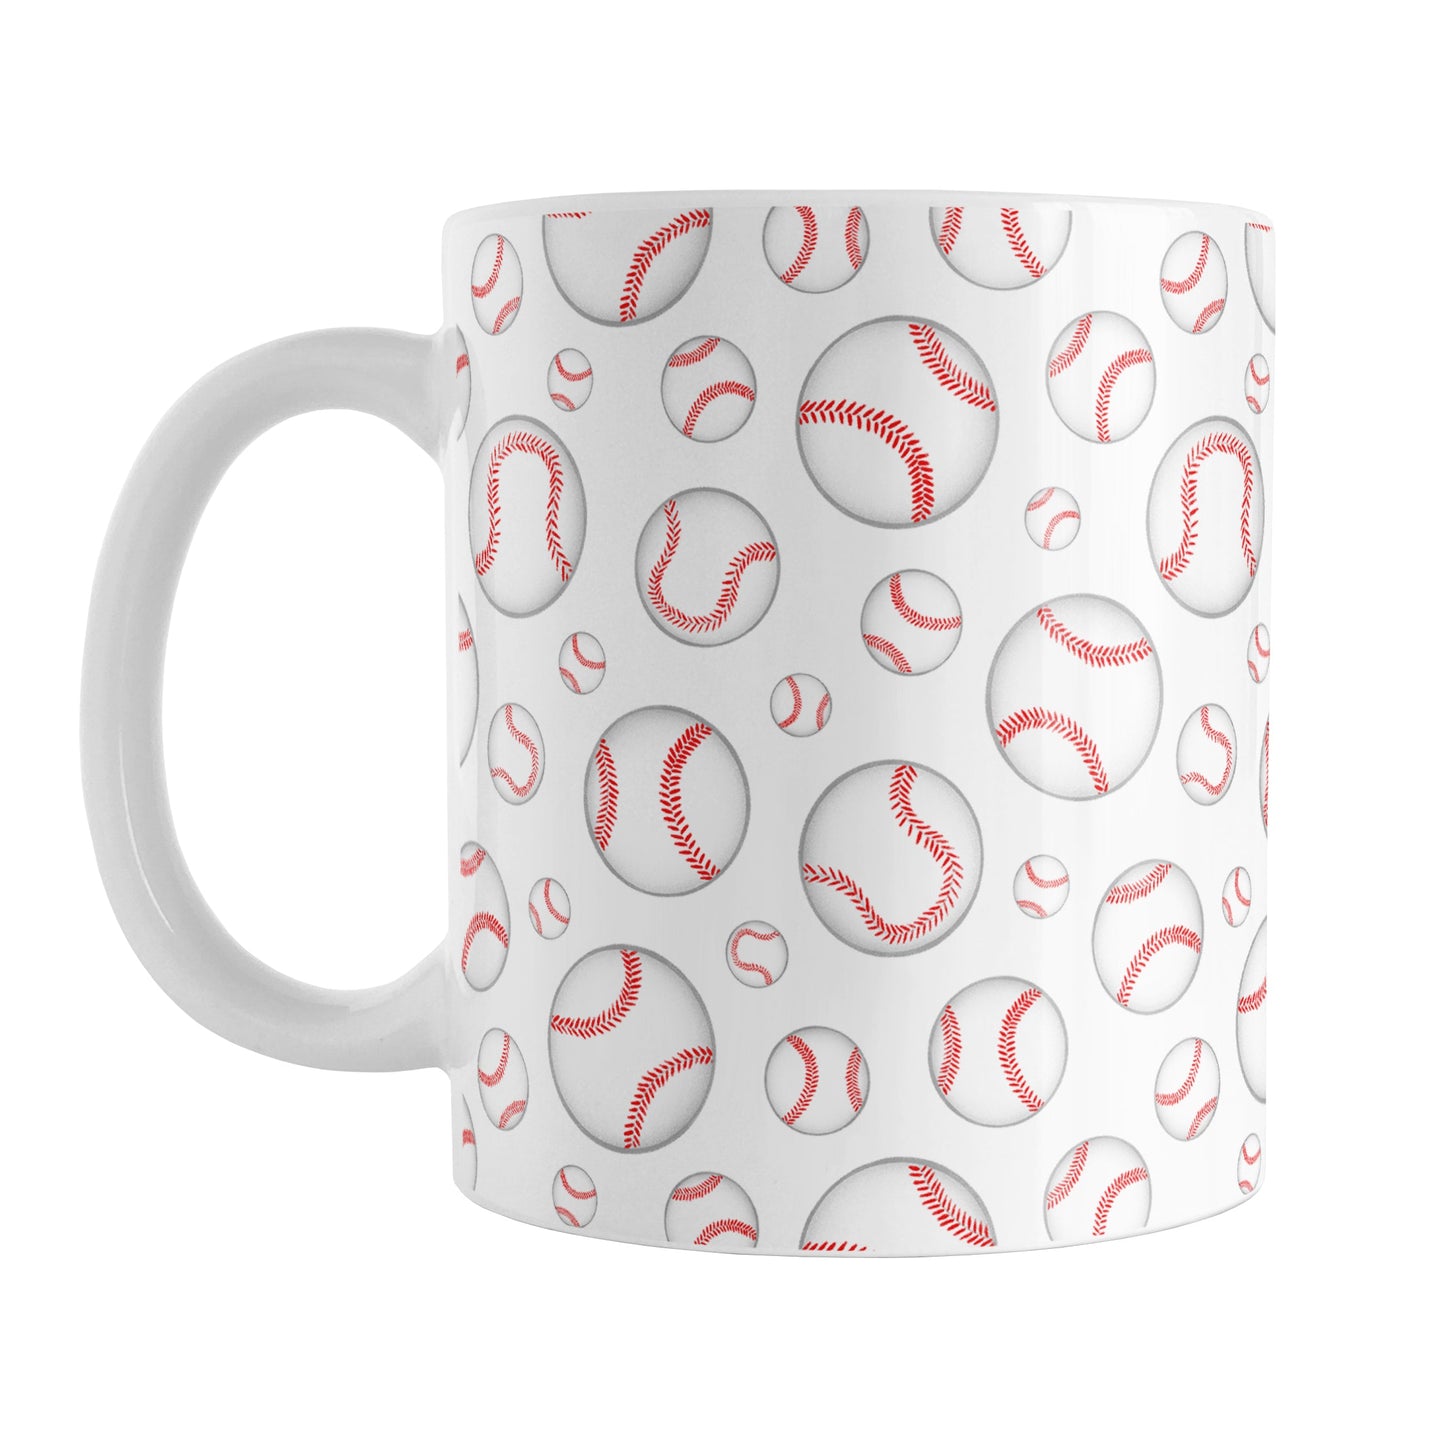 Baseballs Pattern Mug (11oz) at Amy's Coffee Mugs. A ceramic coffee mug designed with hand-drawn baseballs in varying sizes in a pattern that wraps around the mug to the handle. It's perfect for anyone who loves the game of baseball.